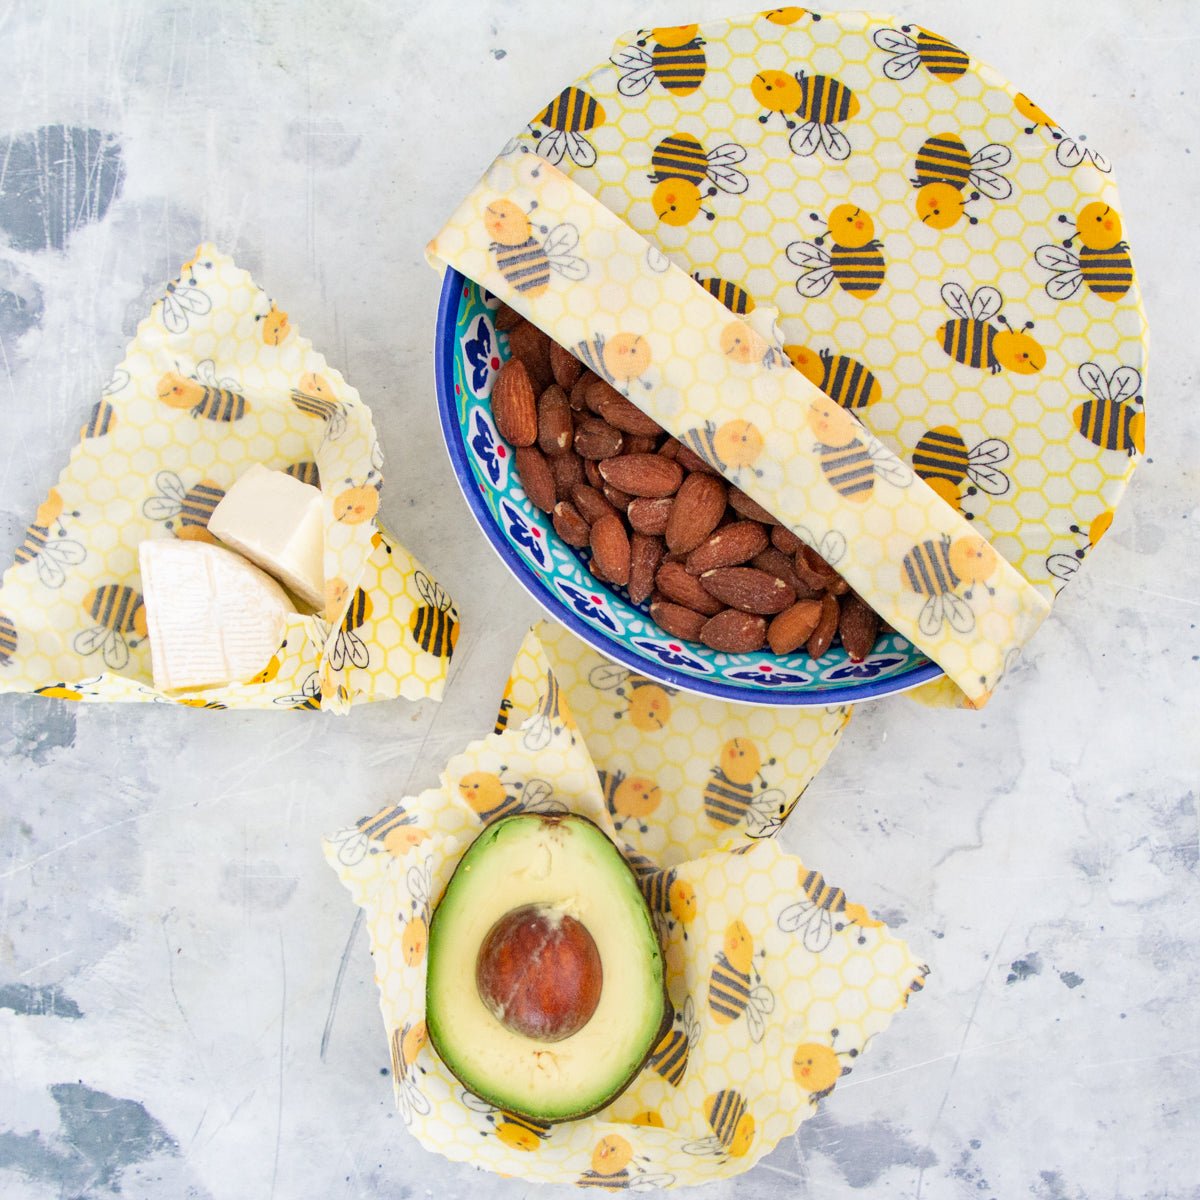 The Best Reusable Beeswax Wrap